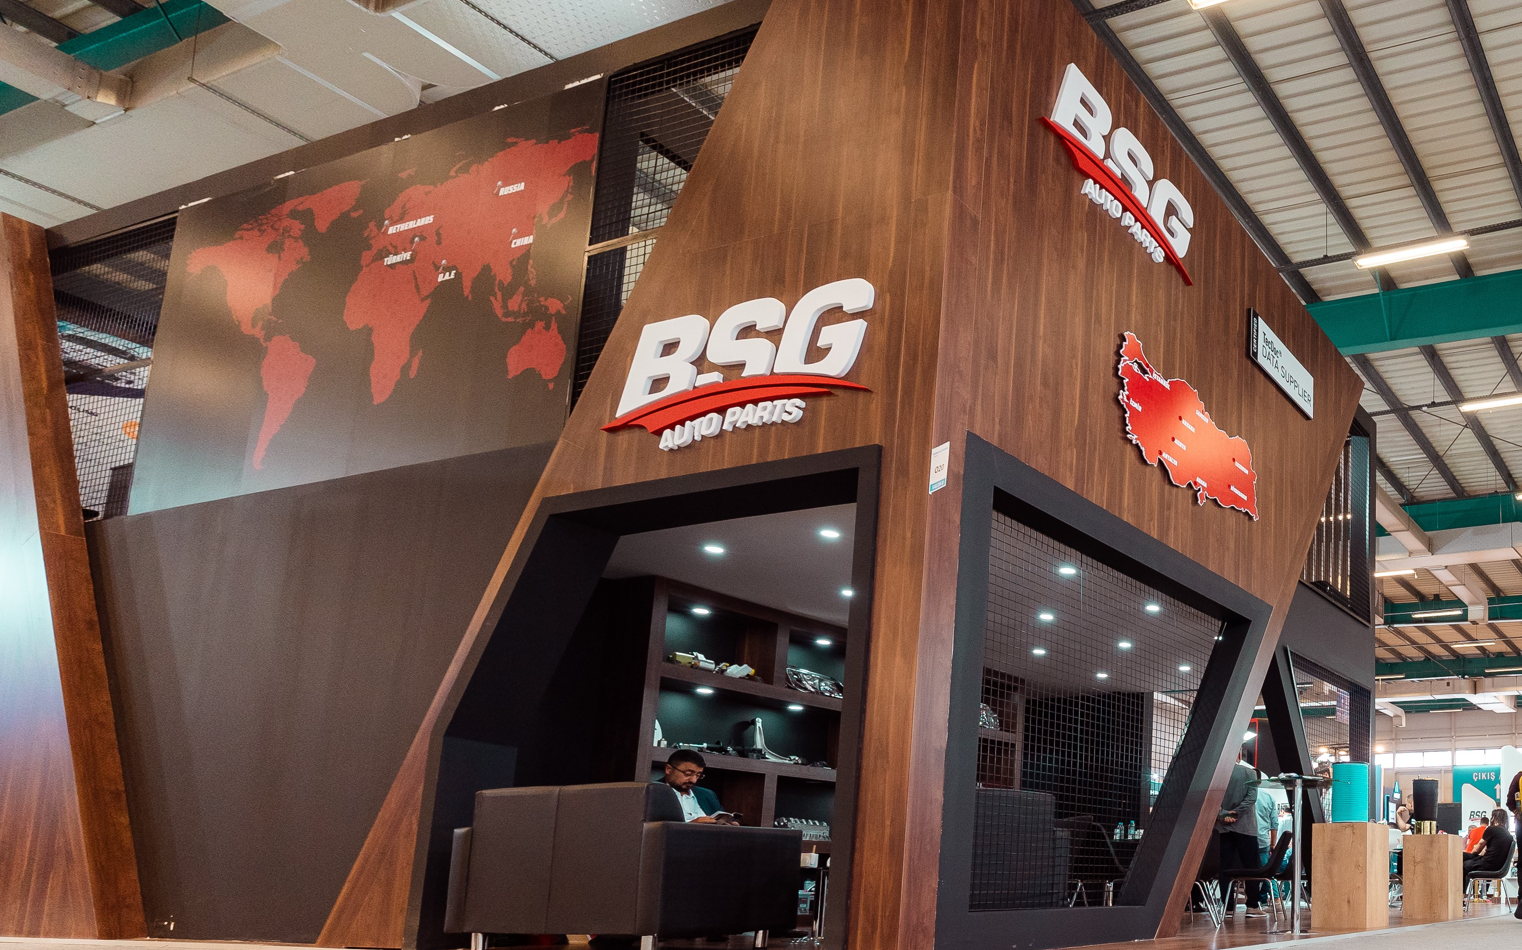 <p>10.06.2022</p>

<p>Automechanika Istanbul, the only event in Turkey of Automechanika, the world's leading fair brand for the automotive aftermarket industry, opened its doors for the 15. time on 2-5 June 2022; BSG Auto Parts took its place in the 8. hall, stand 020, where it has hosted its guests for years.</p>

<p>The fair, which was very productive with the number of participants exceeding expectations, brought together all automotive production and repair professionals from three continents. The fair, which attracted great interest from countries such as Turkey, Iran, Iraq, Palestine, Libya, Bulgaria, Tunisia, Jordan, Egypt and Algeria, was held at TÜYAP Fair and Congress Center.</p>

<p>AutomechanikaI Istanbul, which brings together the automotive aftermarket sector, which has a size of over 30 billion USD in Turkey's exports, with professionals from all over the world once again in Istanbul, was visited by 34,552 and 13,802 international professionals from Turkey and a total of 48,354 people from 141 countries.</p>